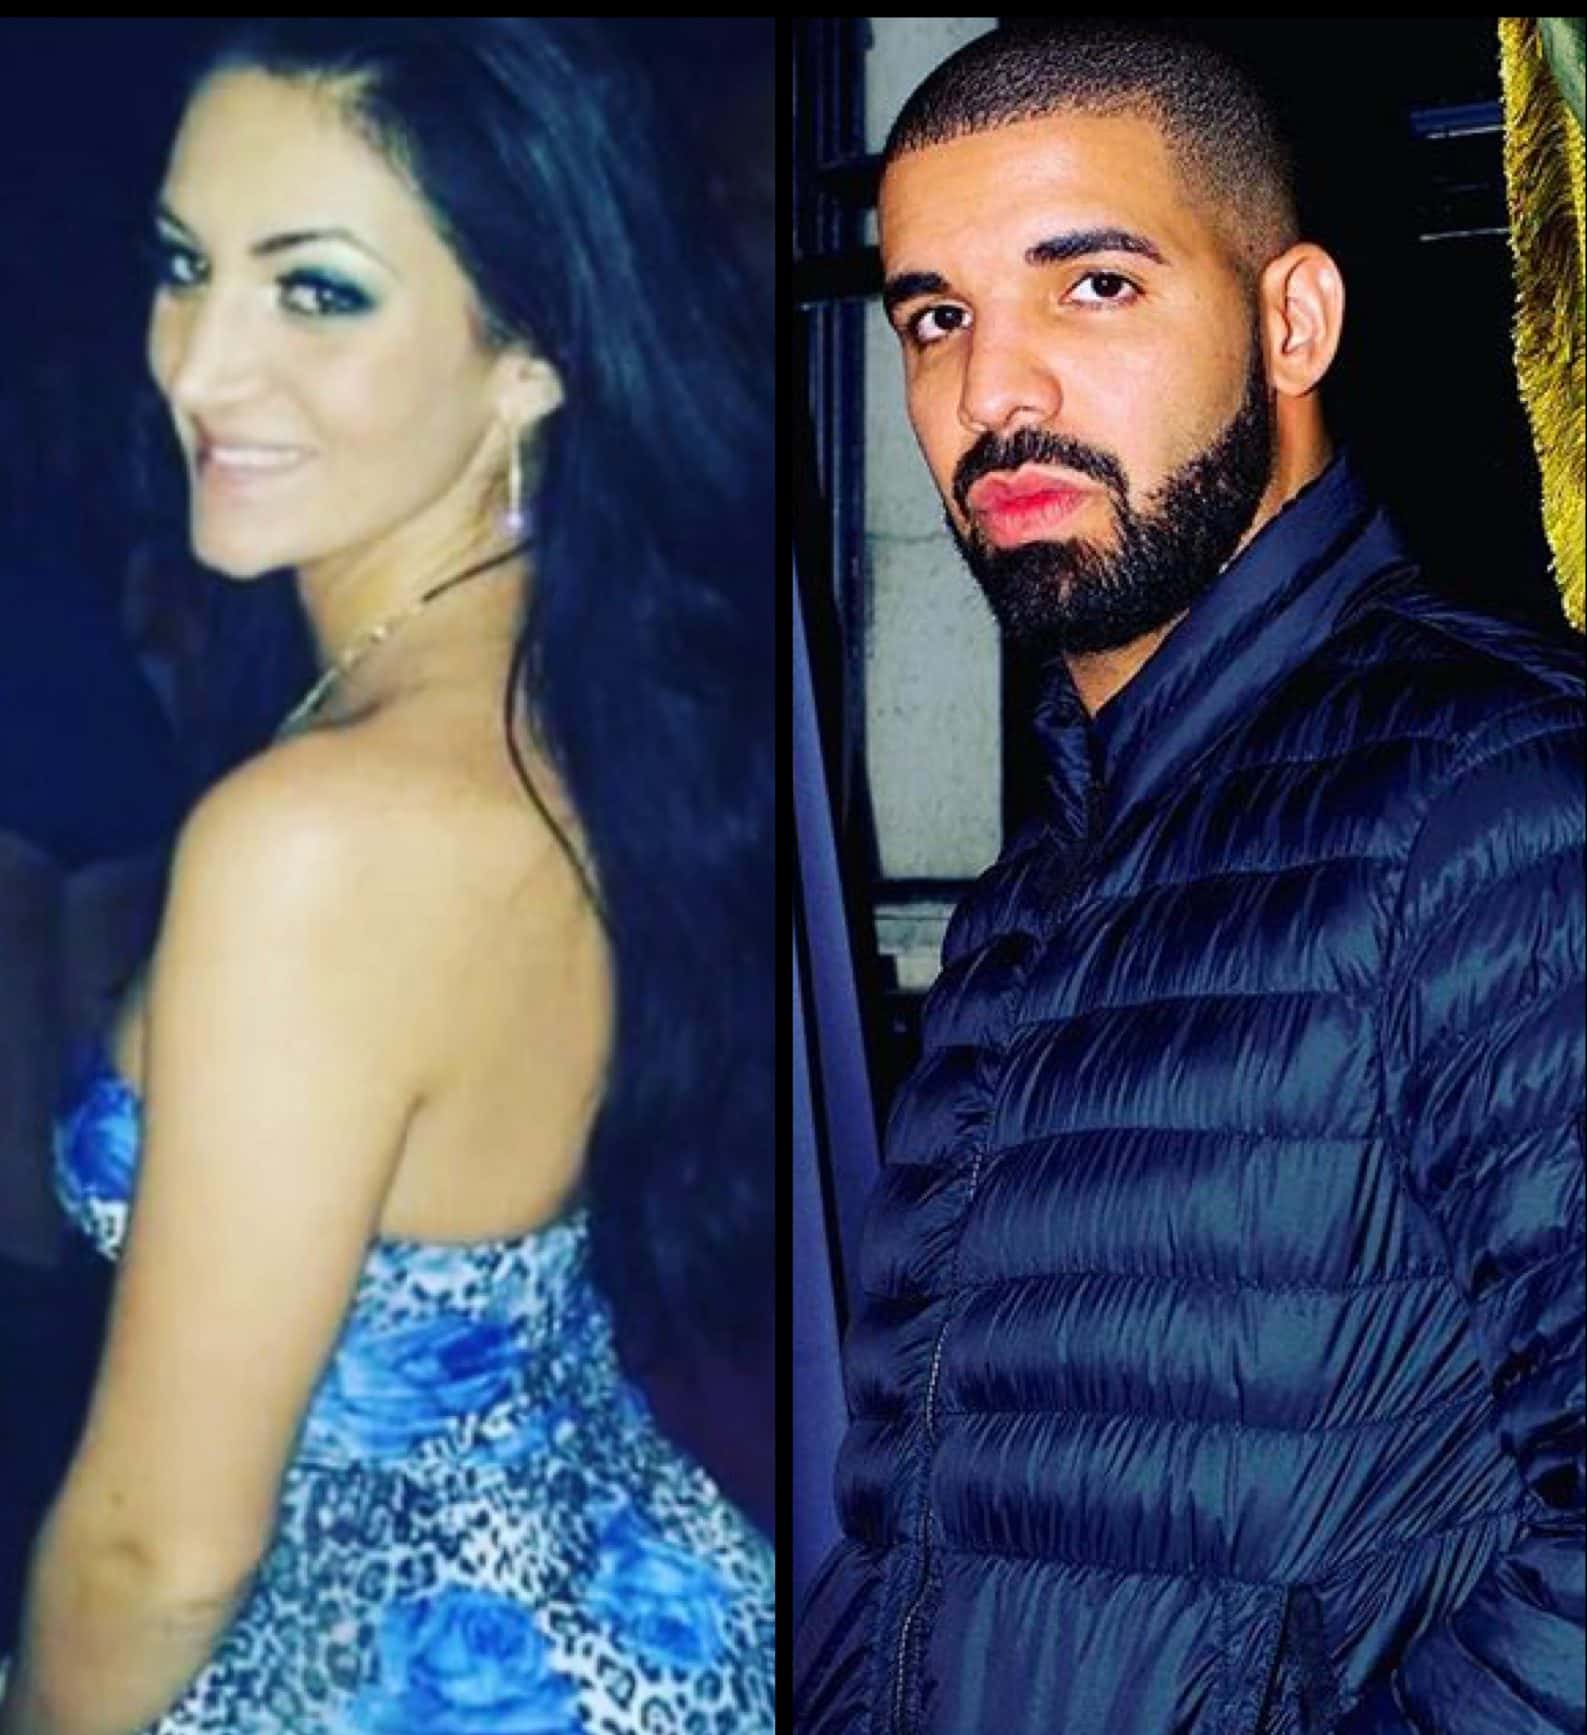 Pregnant Porn Stars Who Had Abortions - Drake Is Reportedly The Father of Ex-Porn Star's Unborn ...